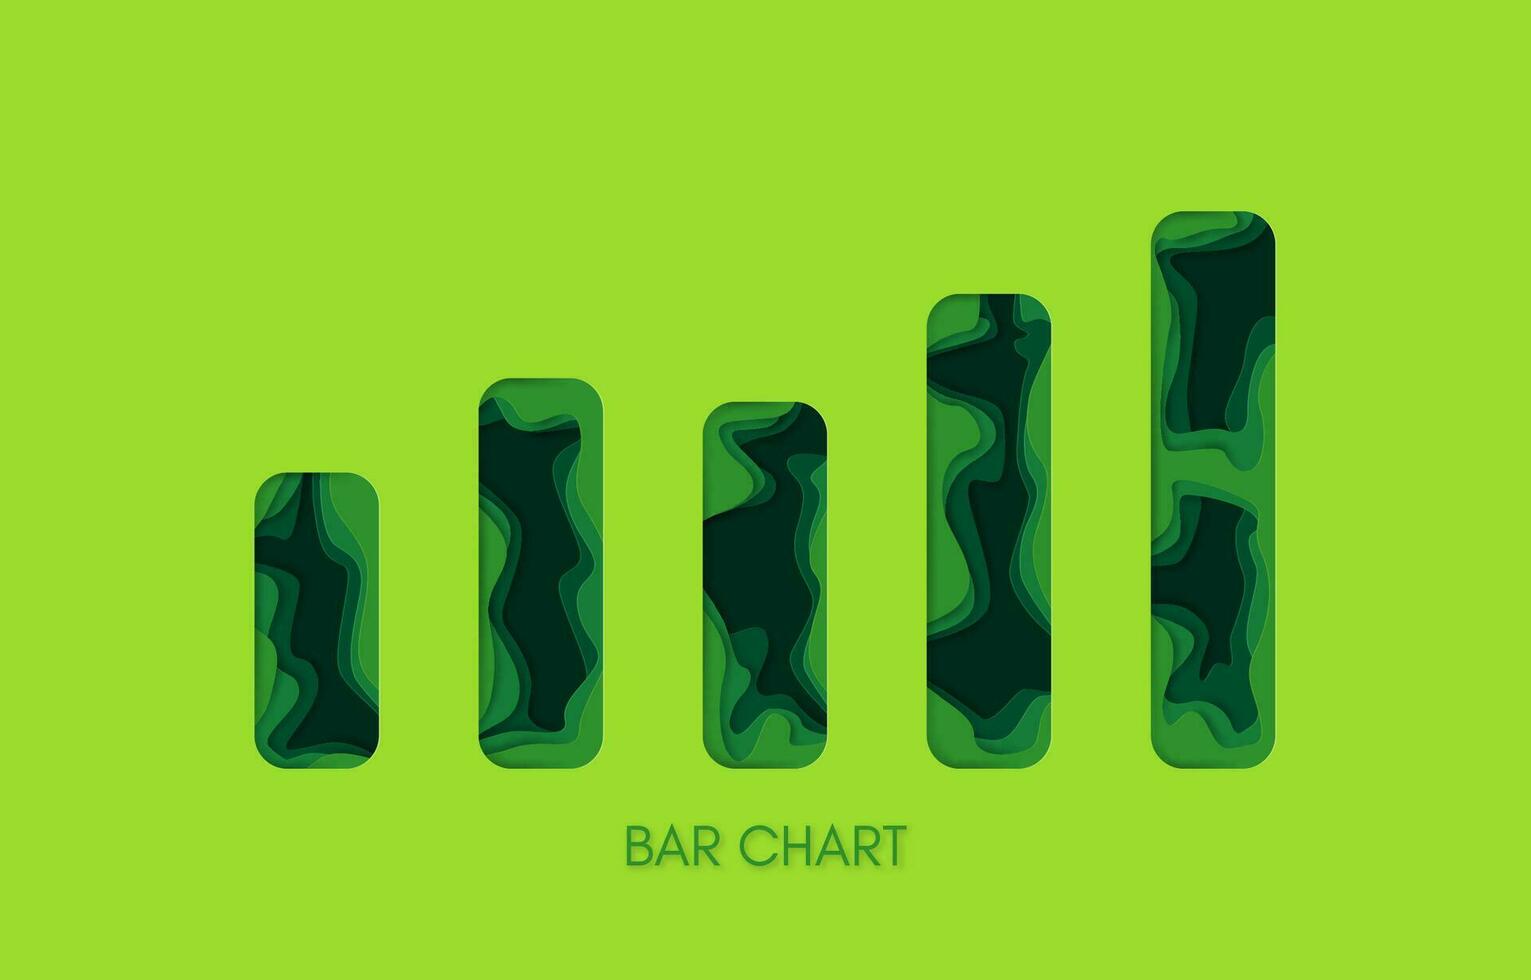 Paper art style of bar chart, business or work performance concept, vector and illustration.